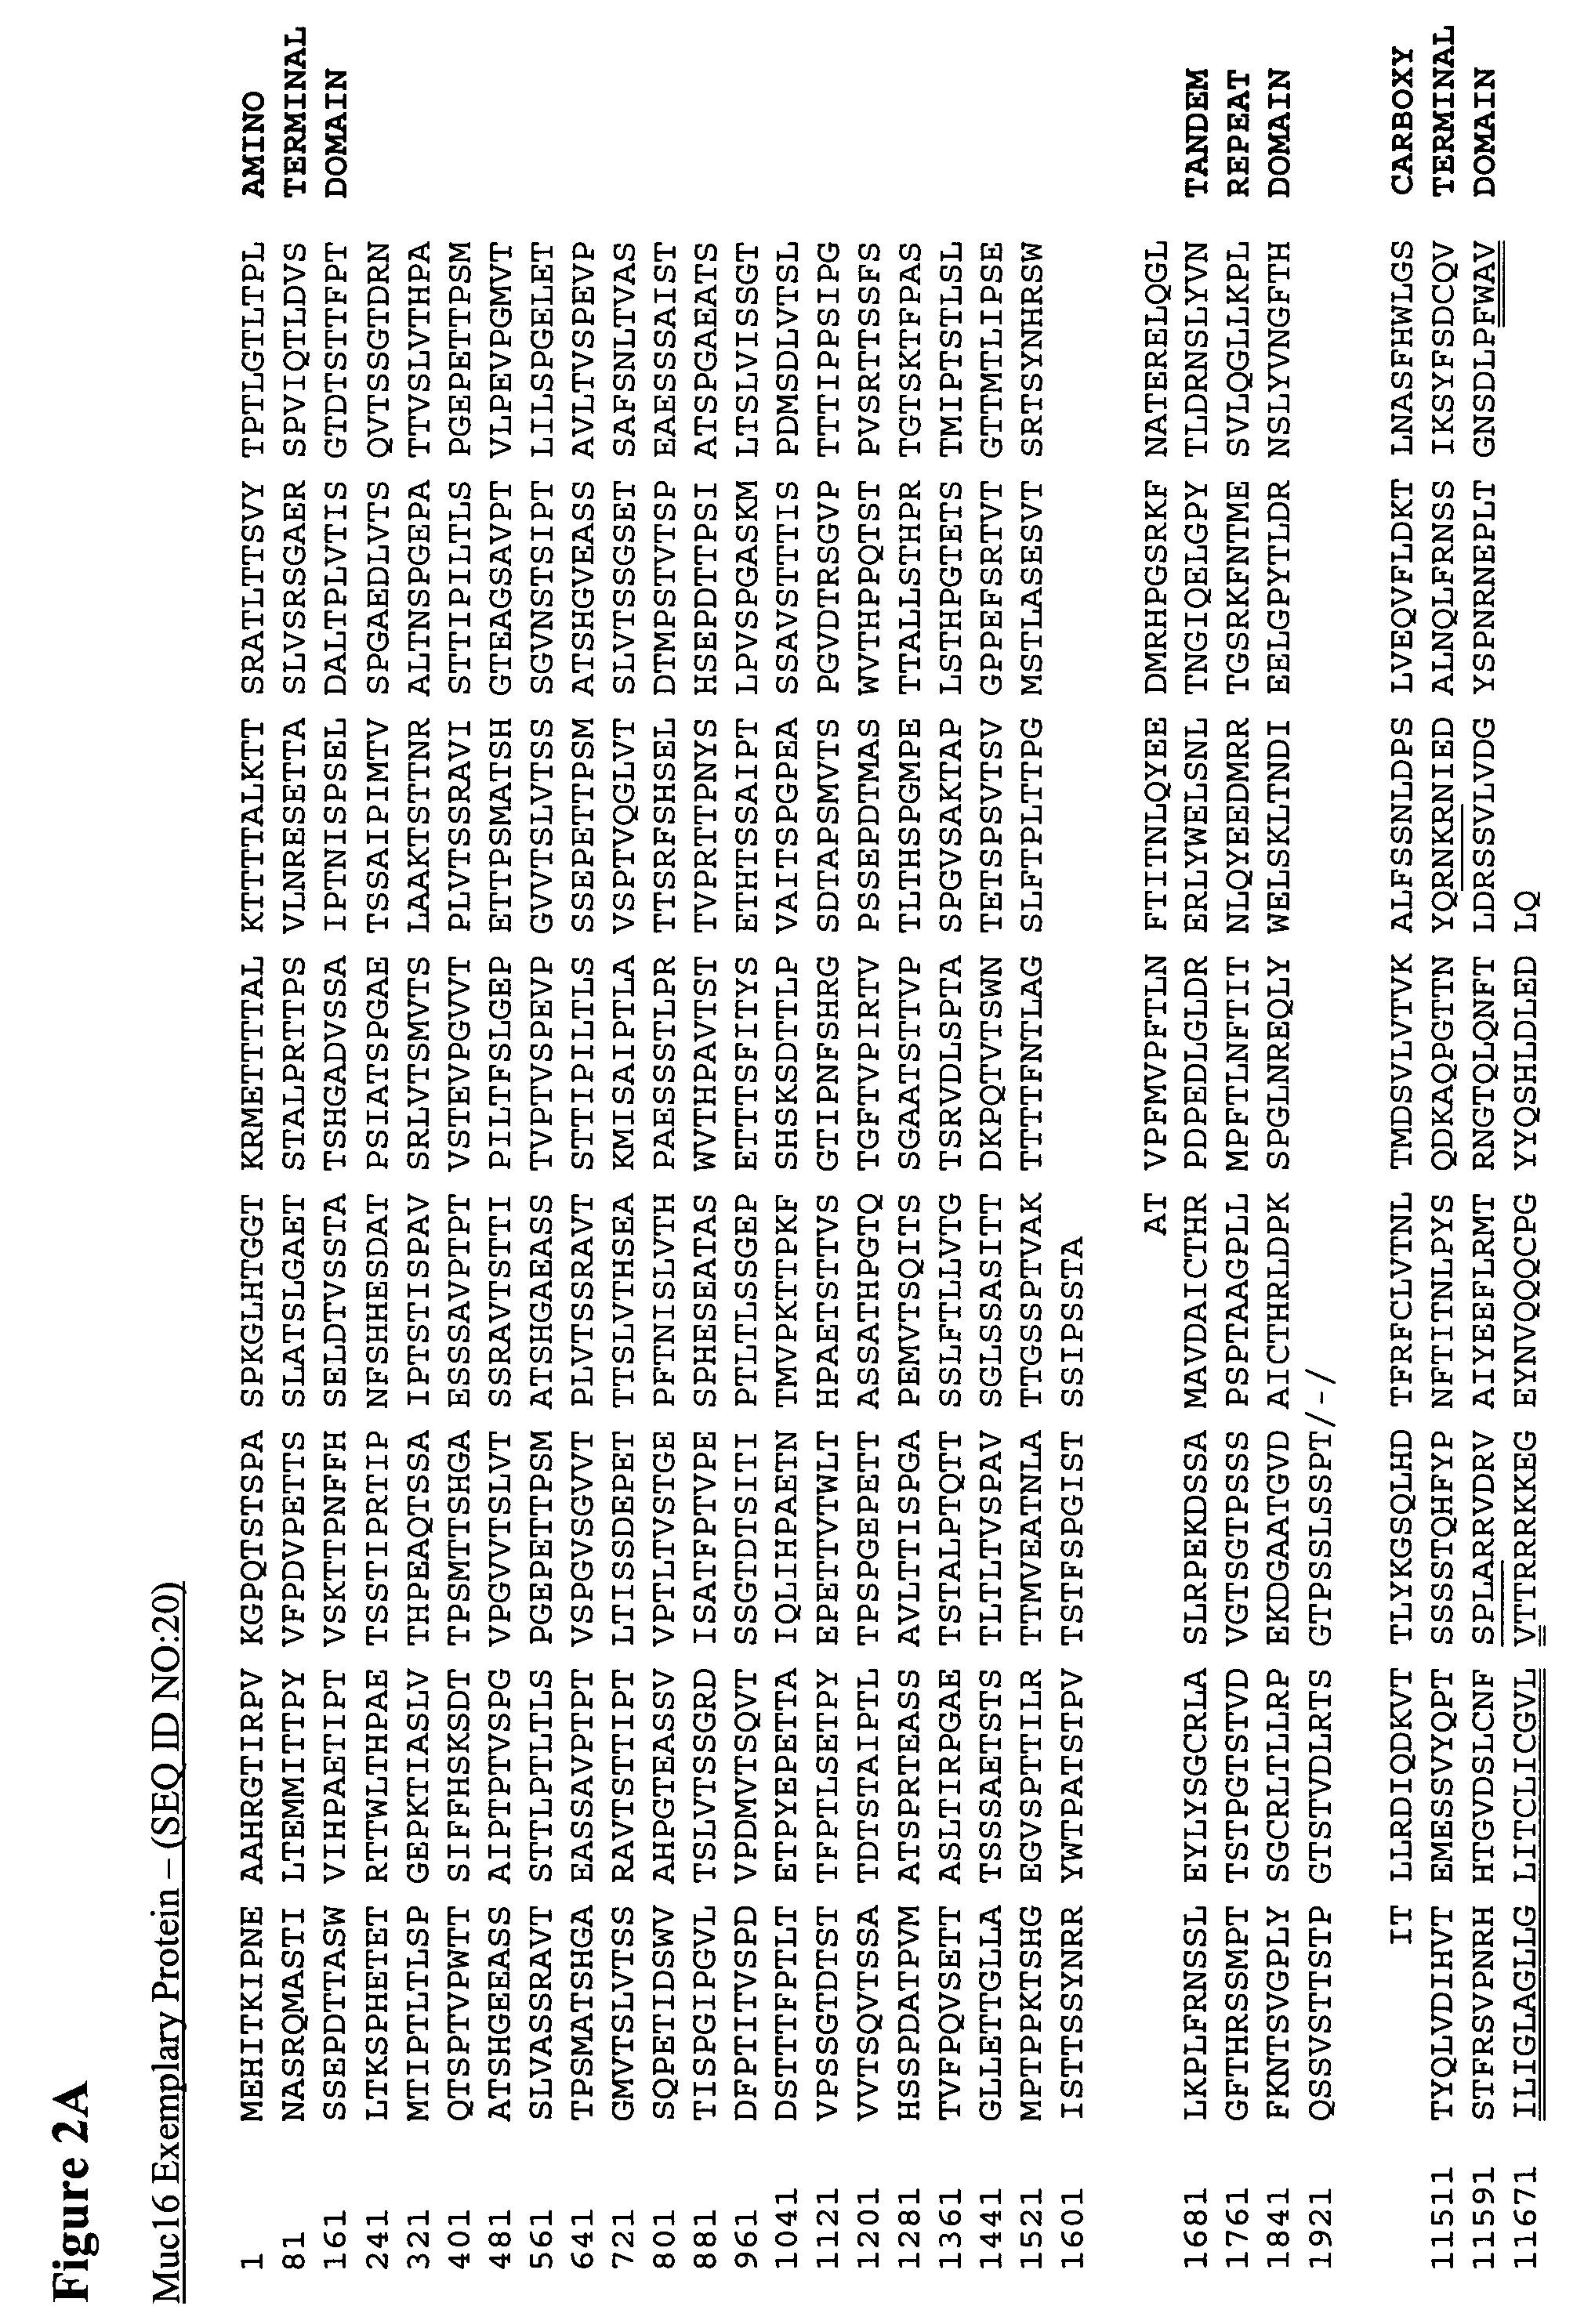 Antibodies to non-shed Muc1 and Muc16, and uses thereof